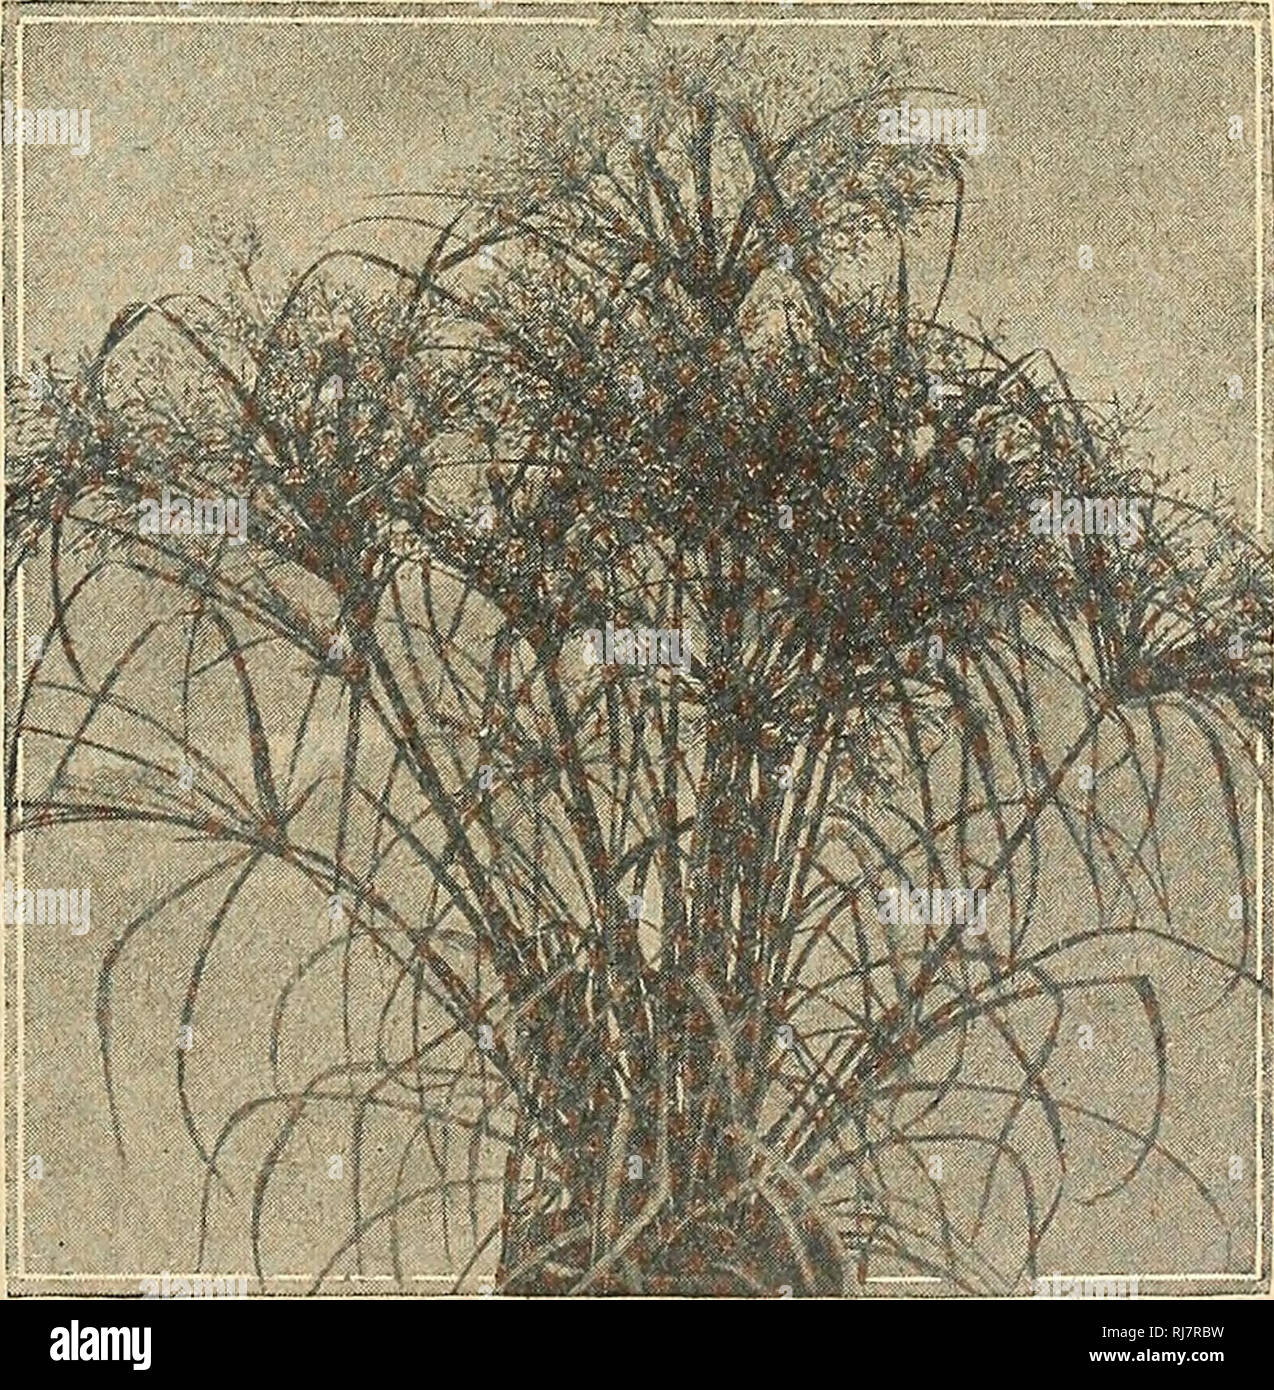 . Childs' 1924. Commercial catalogs Seeds; Nurseries (Horticulture) Catalogs; Seeds Catalogs; Flowers Catalogs; Vegetables Catalogs; Fruit Catalogs; John Lewis Childs (Firm); Commercial catalogs; Nurseries (Horticulture); Seeds; Flowers; Vegetables; Fruit. Fountain Cyperus is one of the most magnificent plants for the lawn or garden Fountain CyperUS. Papyrus, Paper Plant. This is the rare old Egyptian bullrush. From the fibrous parts of the tall, slender stems was made the paper of ancient times. It is at home in damp places or along the margins of streams or ponds, but it also grows well with Stock Photo